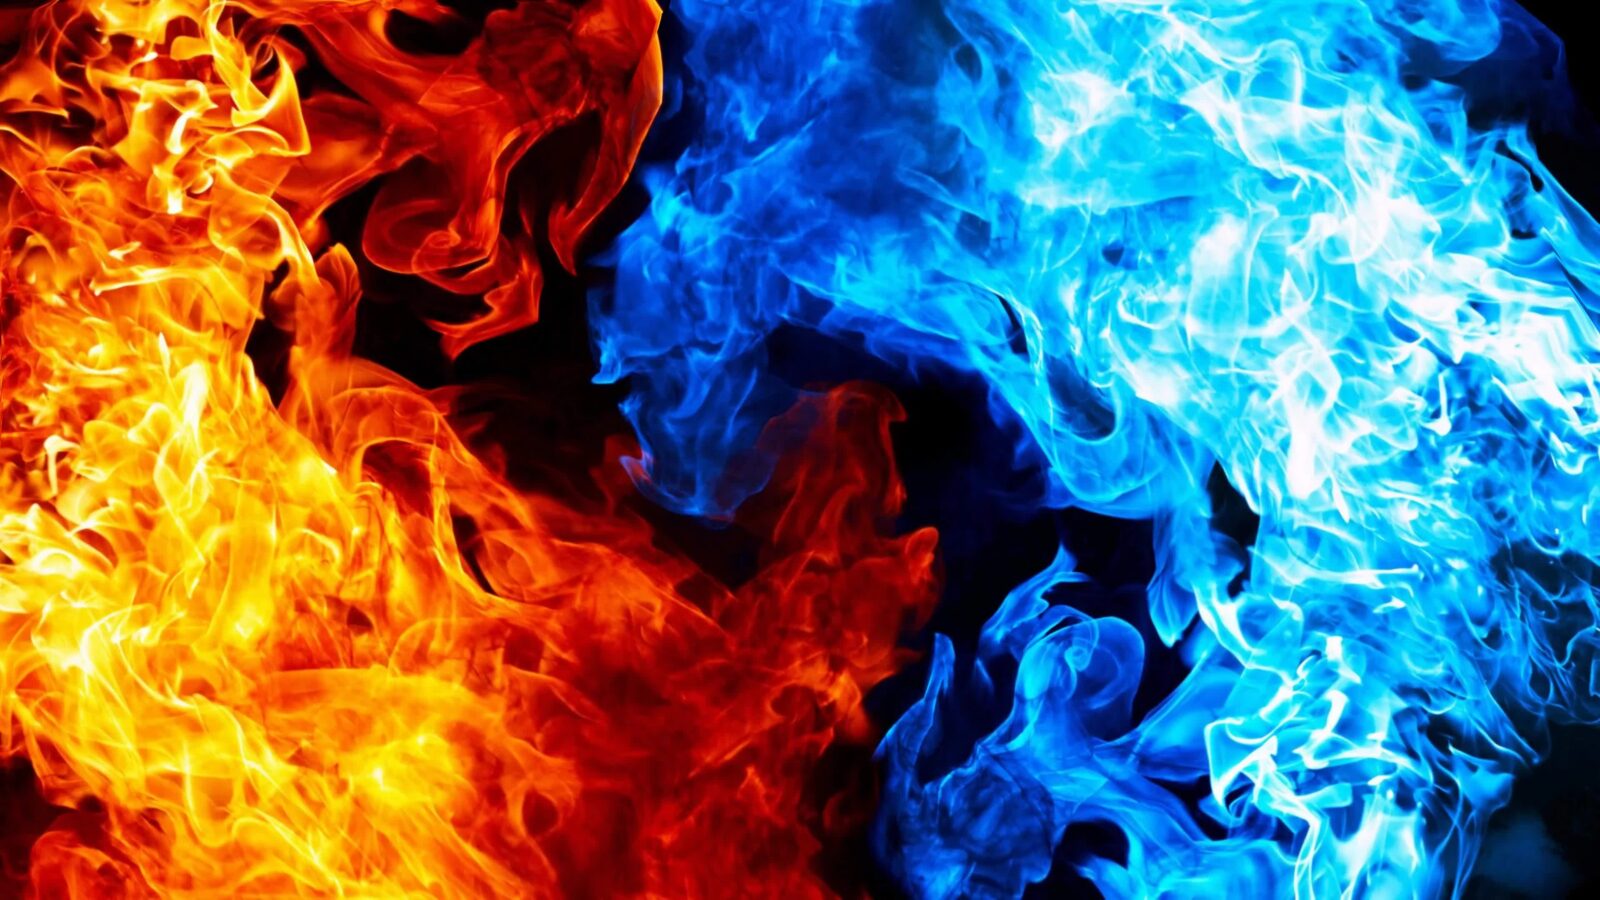 LiveWallpapers4Free.com | Red Flame and Blue Fire 4K Abstract Artwork - Free Live Wallpaper